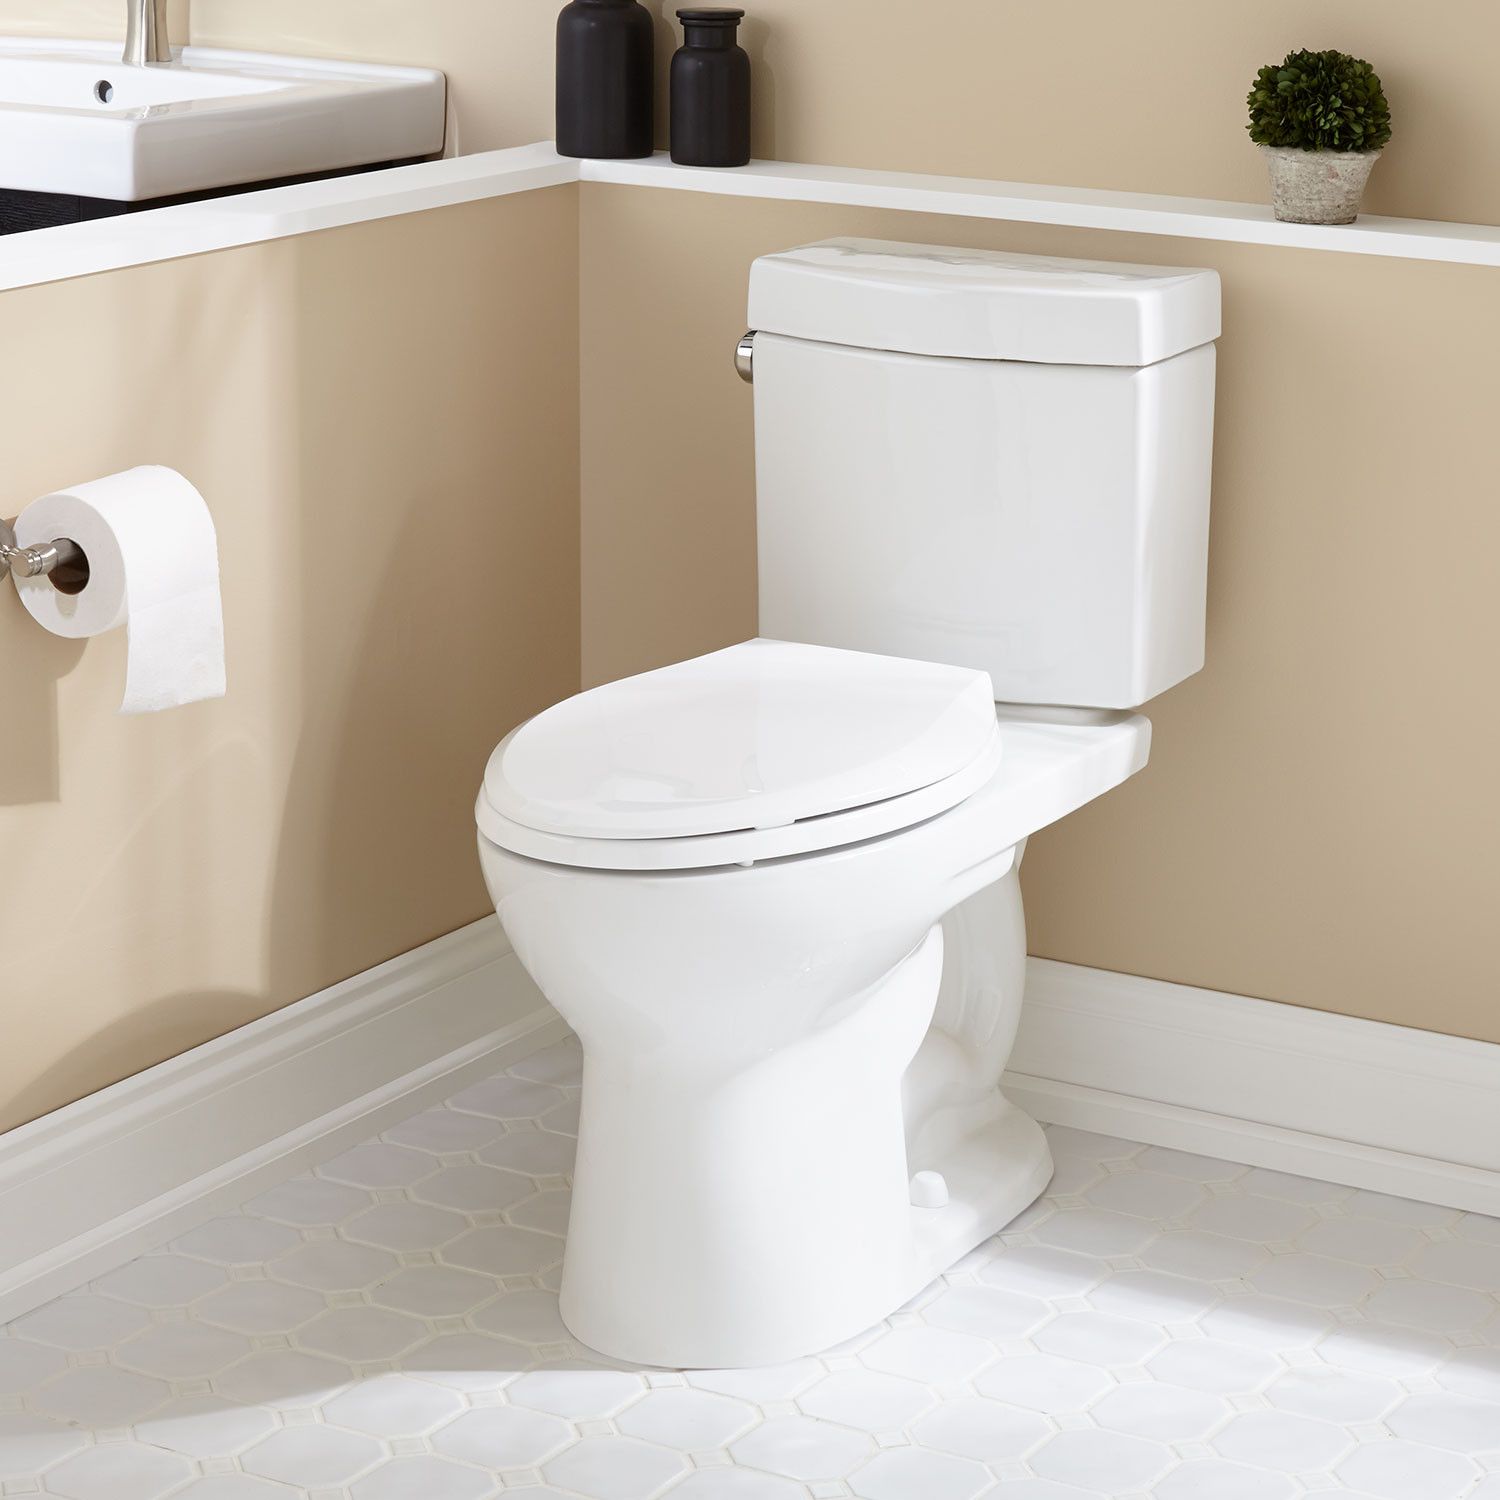 What Is An Ada Compliant Toilet